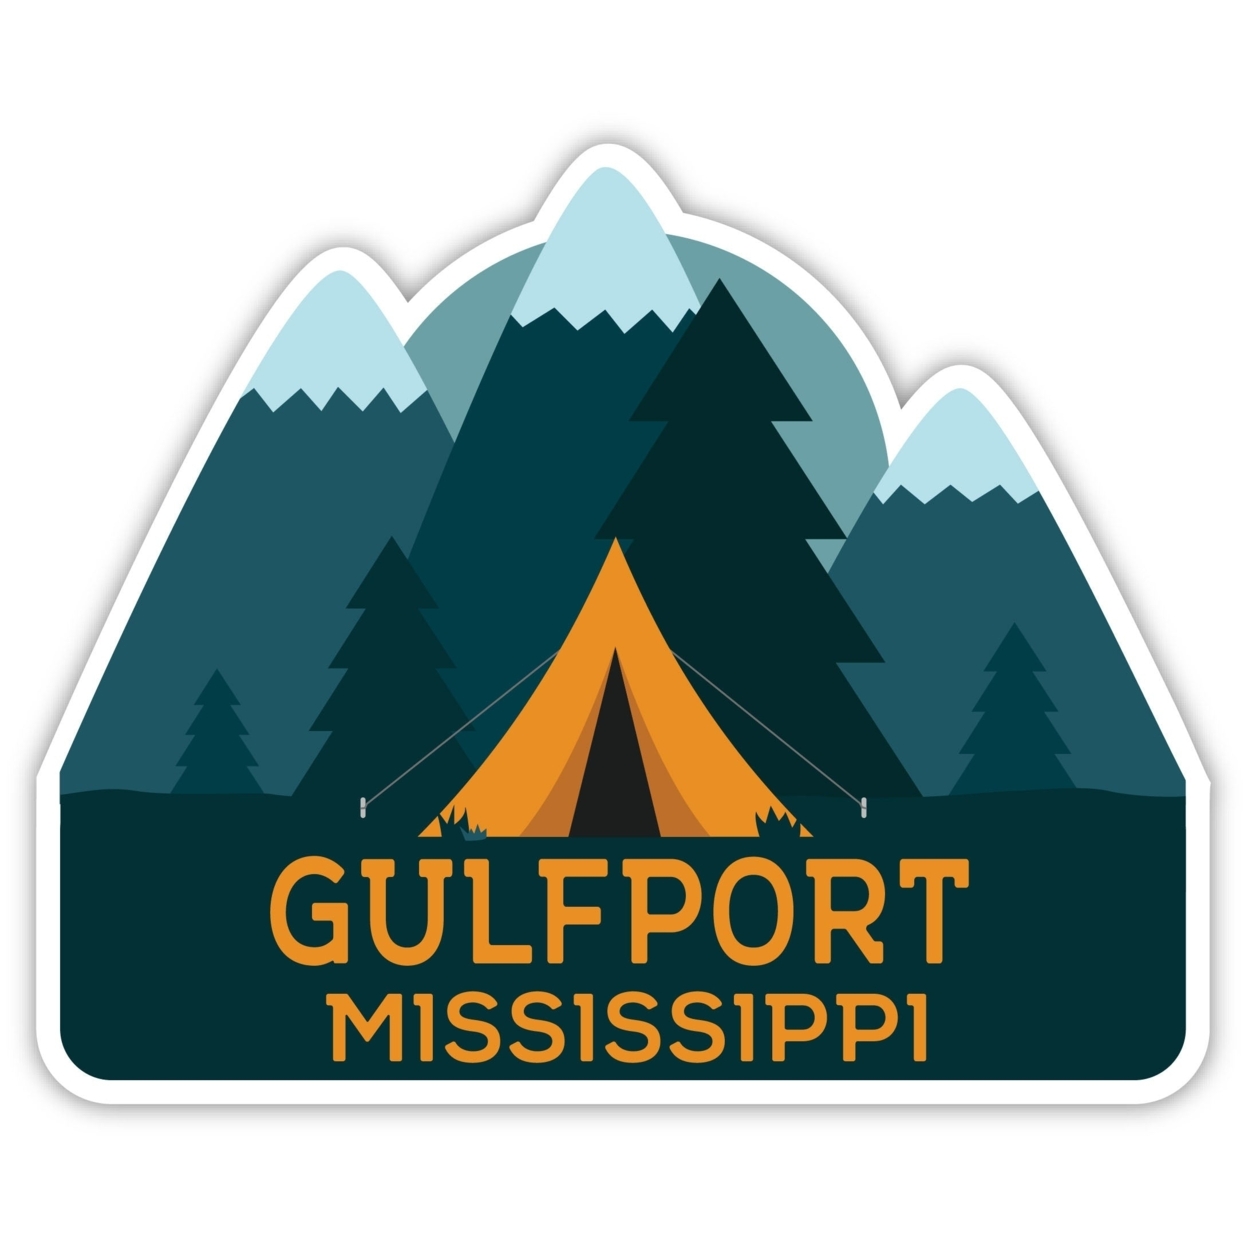 Gulfport Mississippi Souvenir Decorative Stickers (Choose Theme And Size) - 4-Pack, 12-Inch, Adventures Awaits